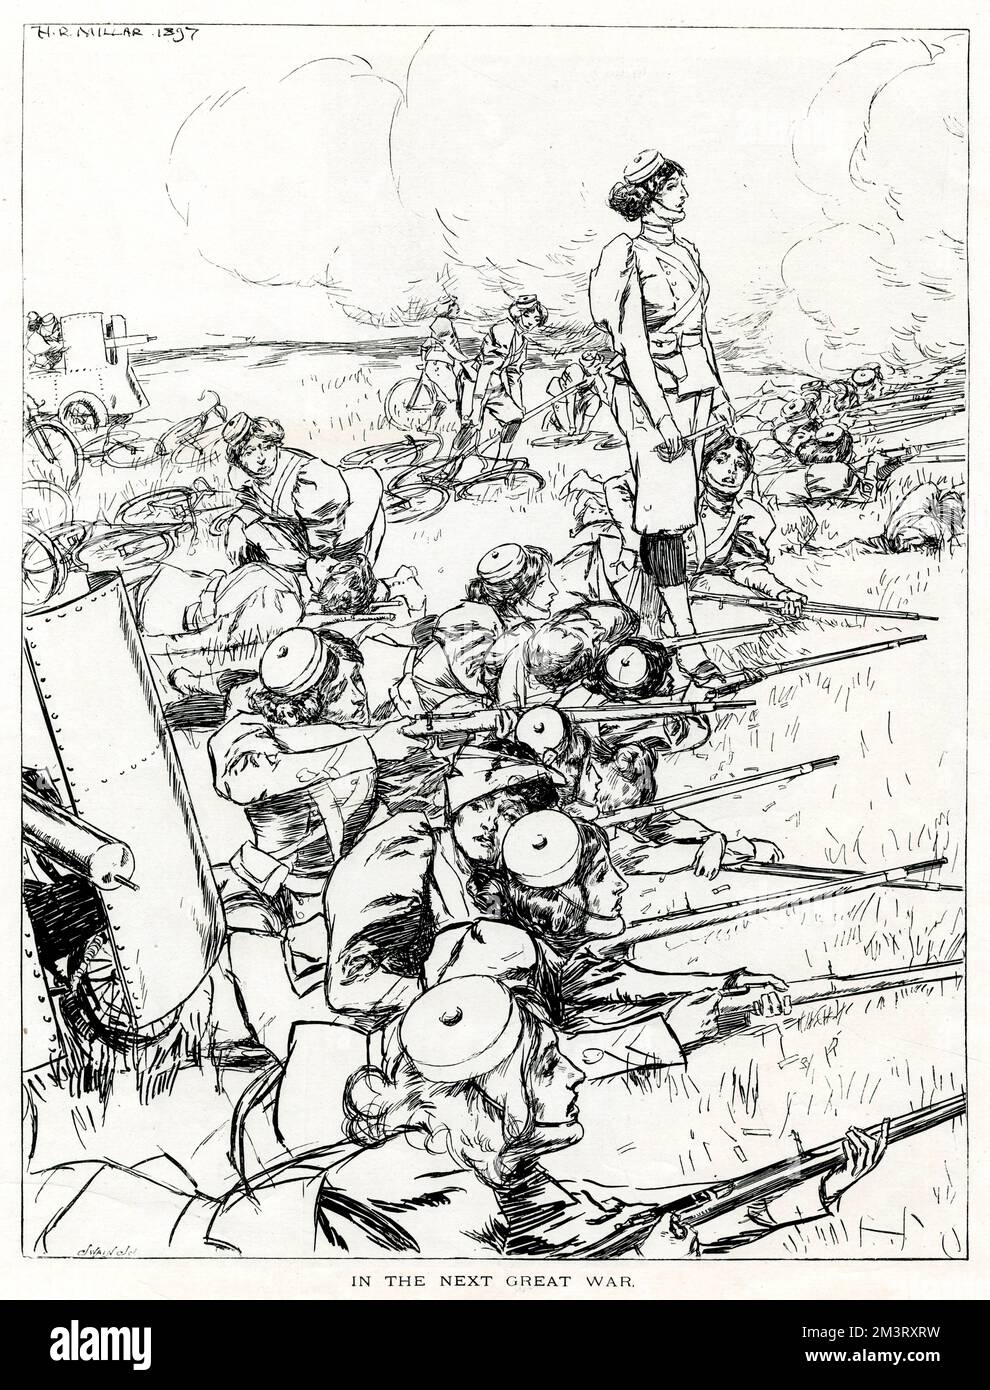 Hypothetical depiction of 'the next great war', showing an army made up entirely of female soldiers riflemen and artillery, one of which lies dead on the grass. Presumably a comment on the changing social role of women in the 19th century and their increased importance outside the domestic sphere.      Date: 1897 Stock Photo